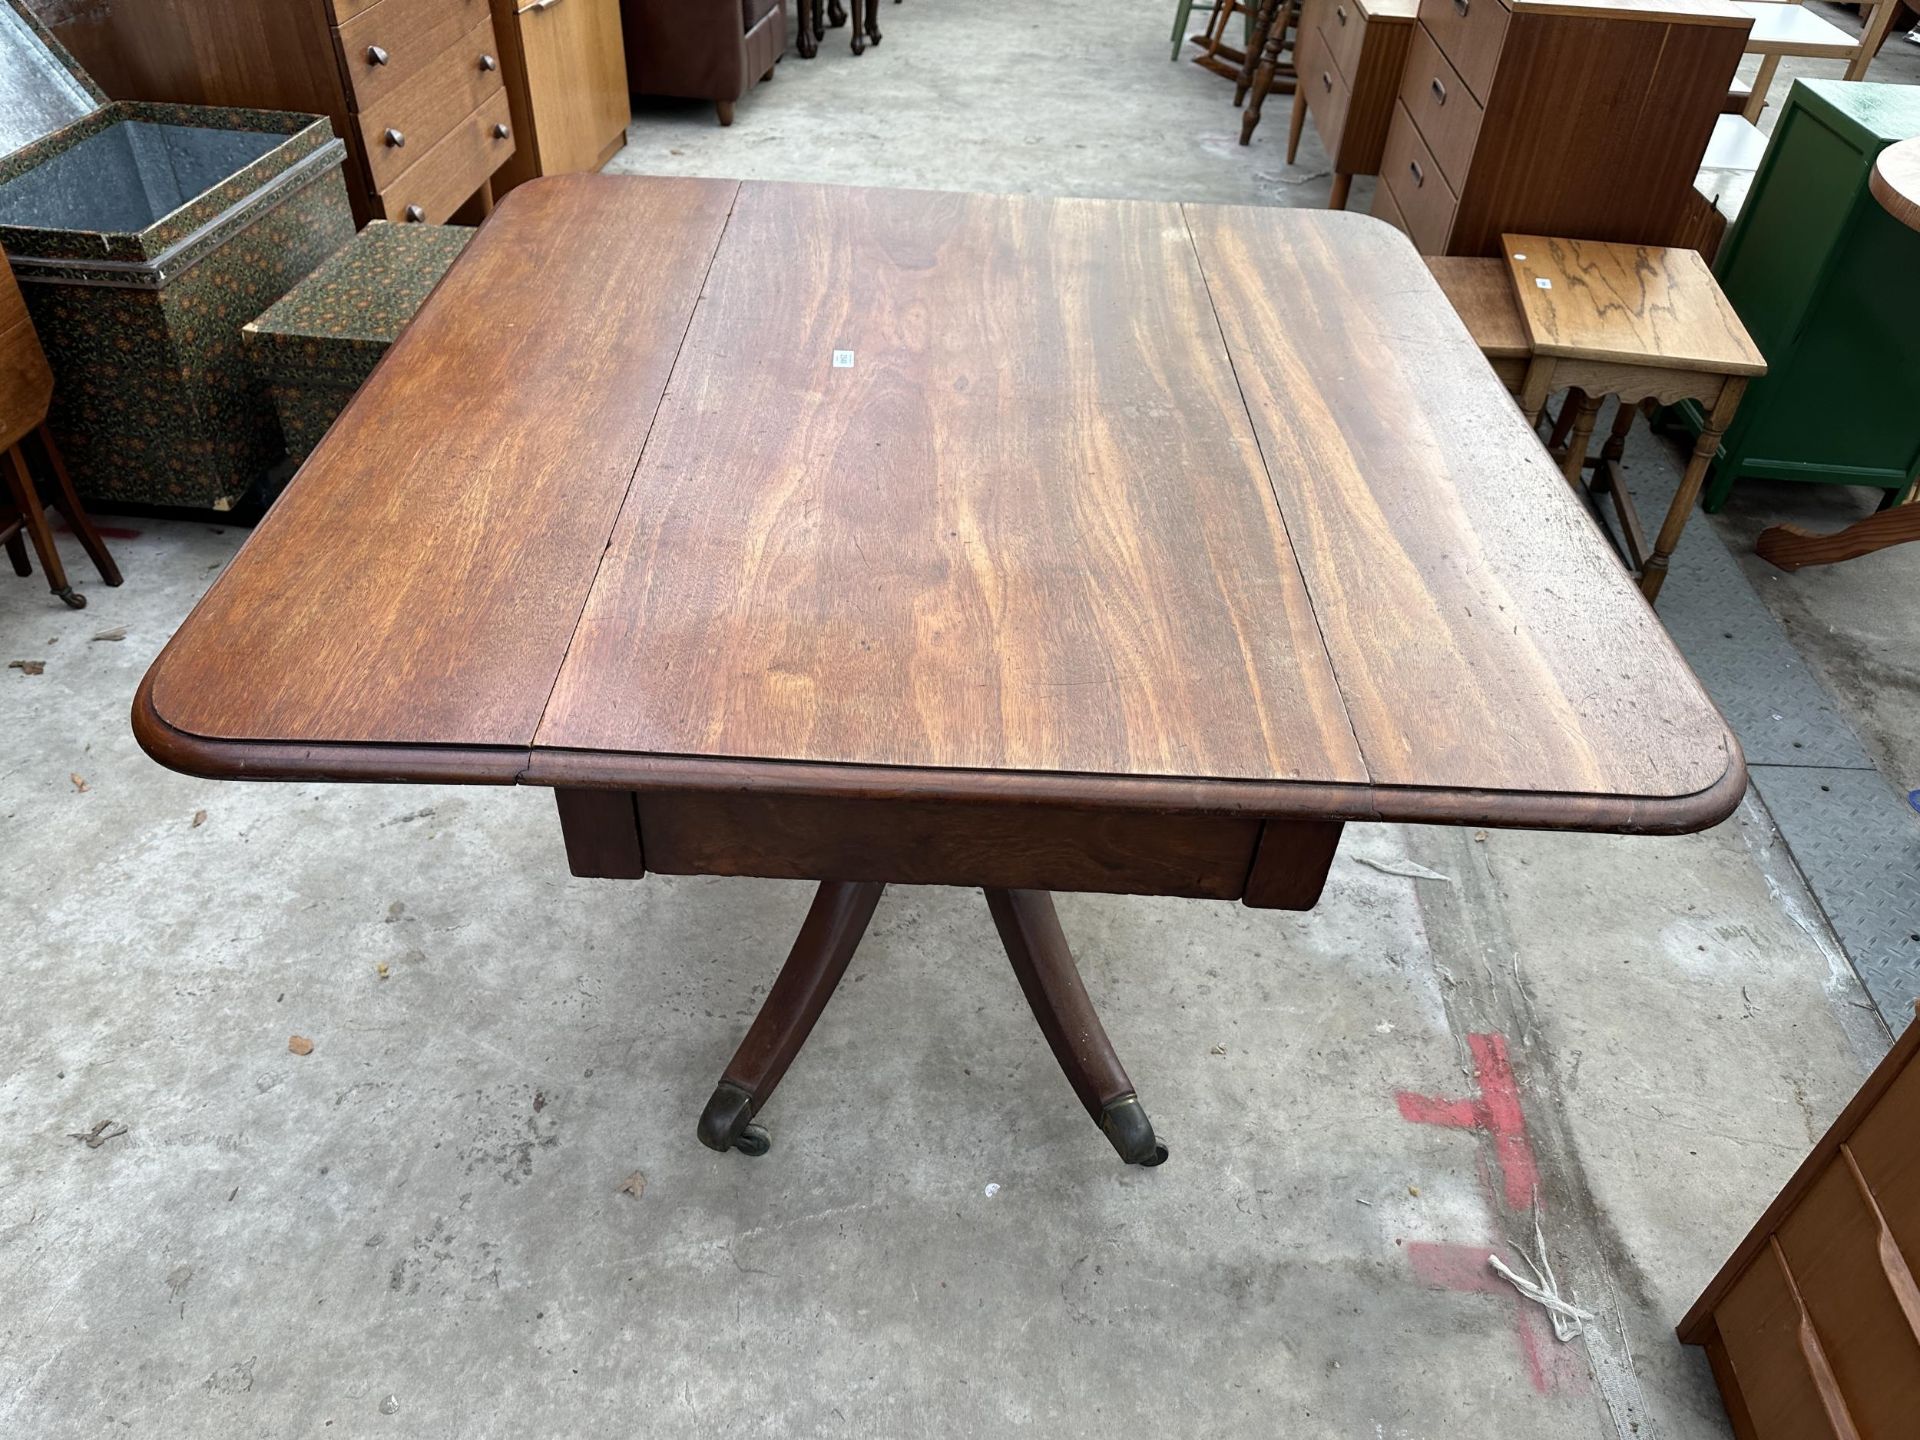 A 19TH CENTURY MAHOGANY PEDESTAL DROP LEAF TABLE WITH BRASS CASTERS 48" SQUARE OPENER - Image 3 of 4